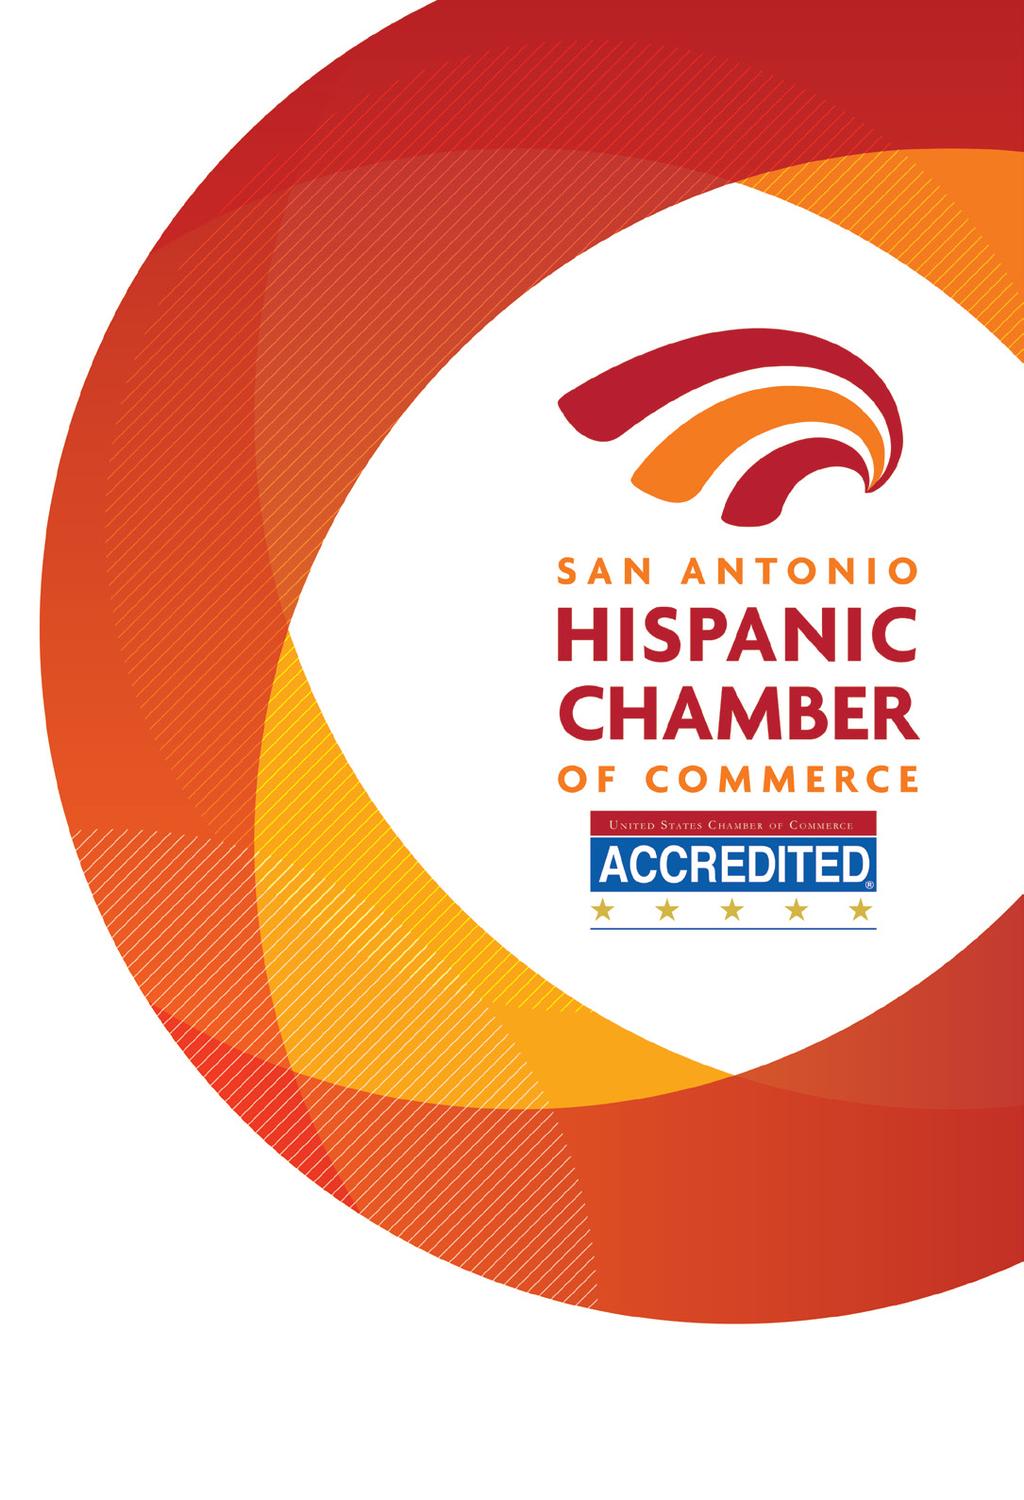 AMERICA S FIRST HISPANIC CHAMBER OF COMMERCE ESTABLISHED IN